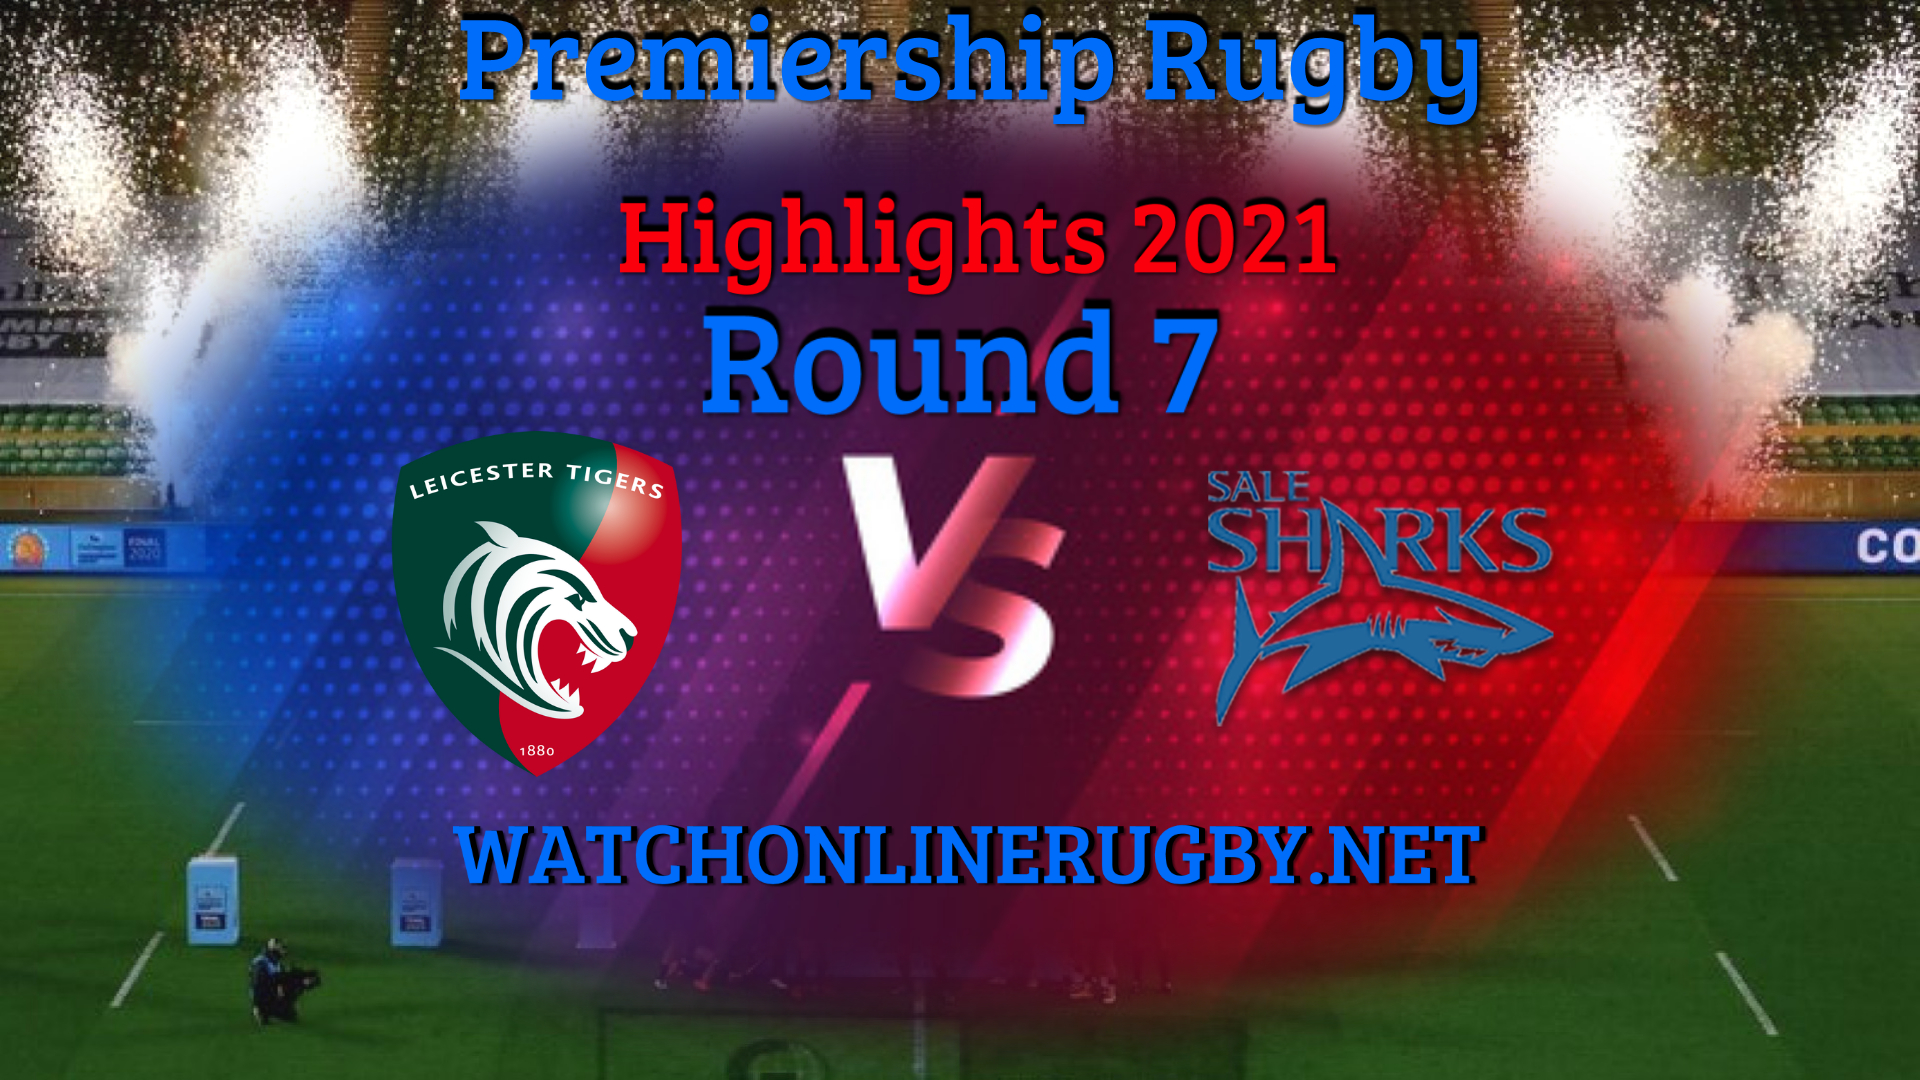 Leicester Tigers VS Sale Sharks Premiership Rugby 2021 RD 7